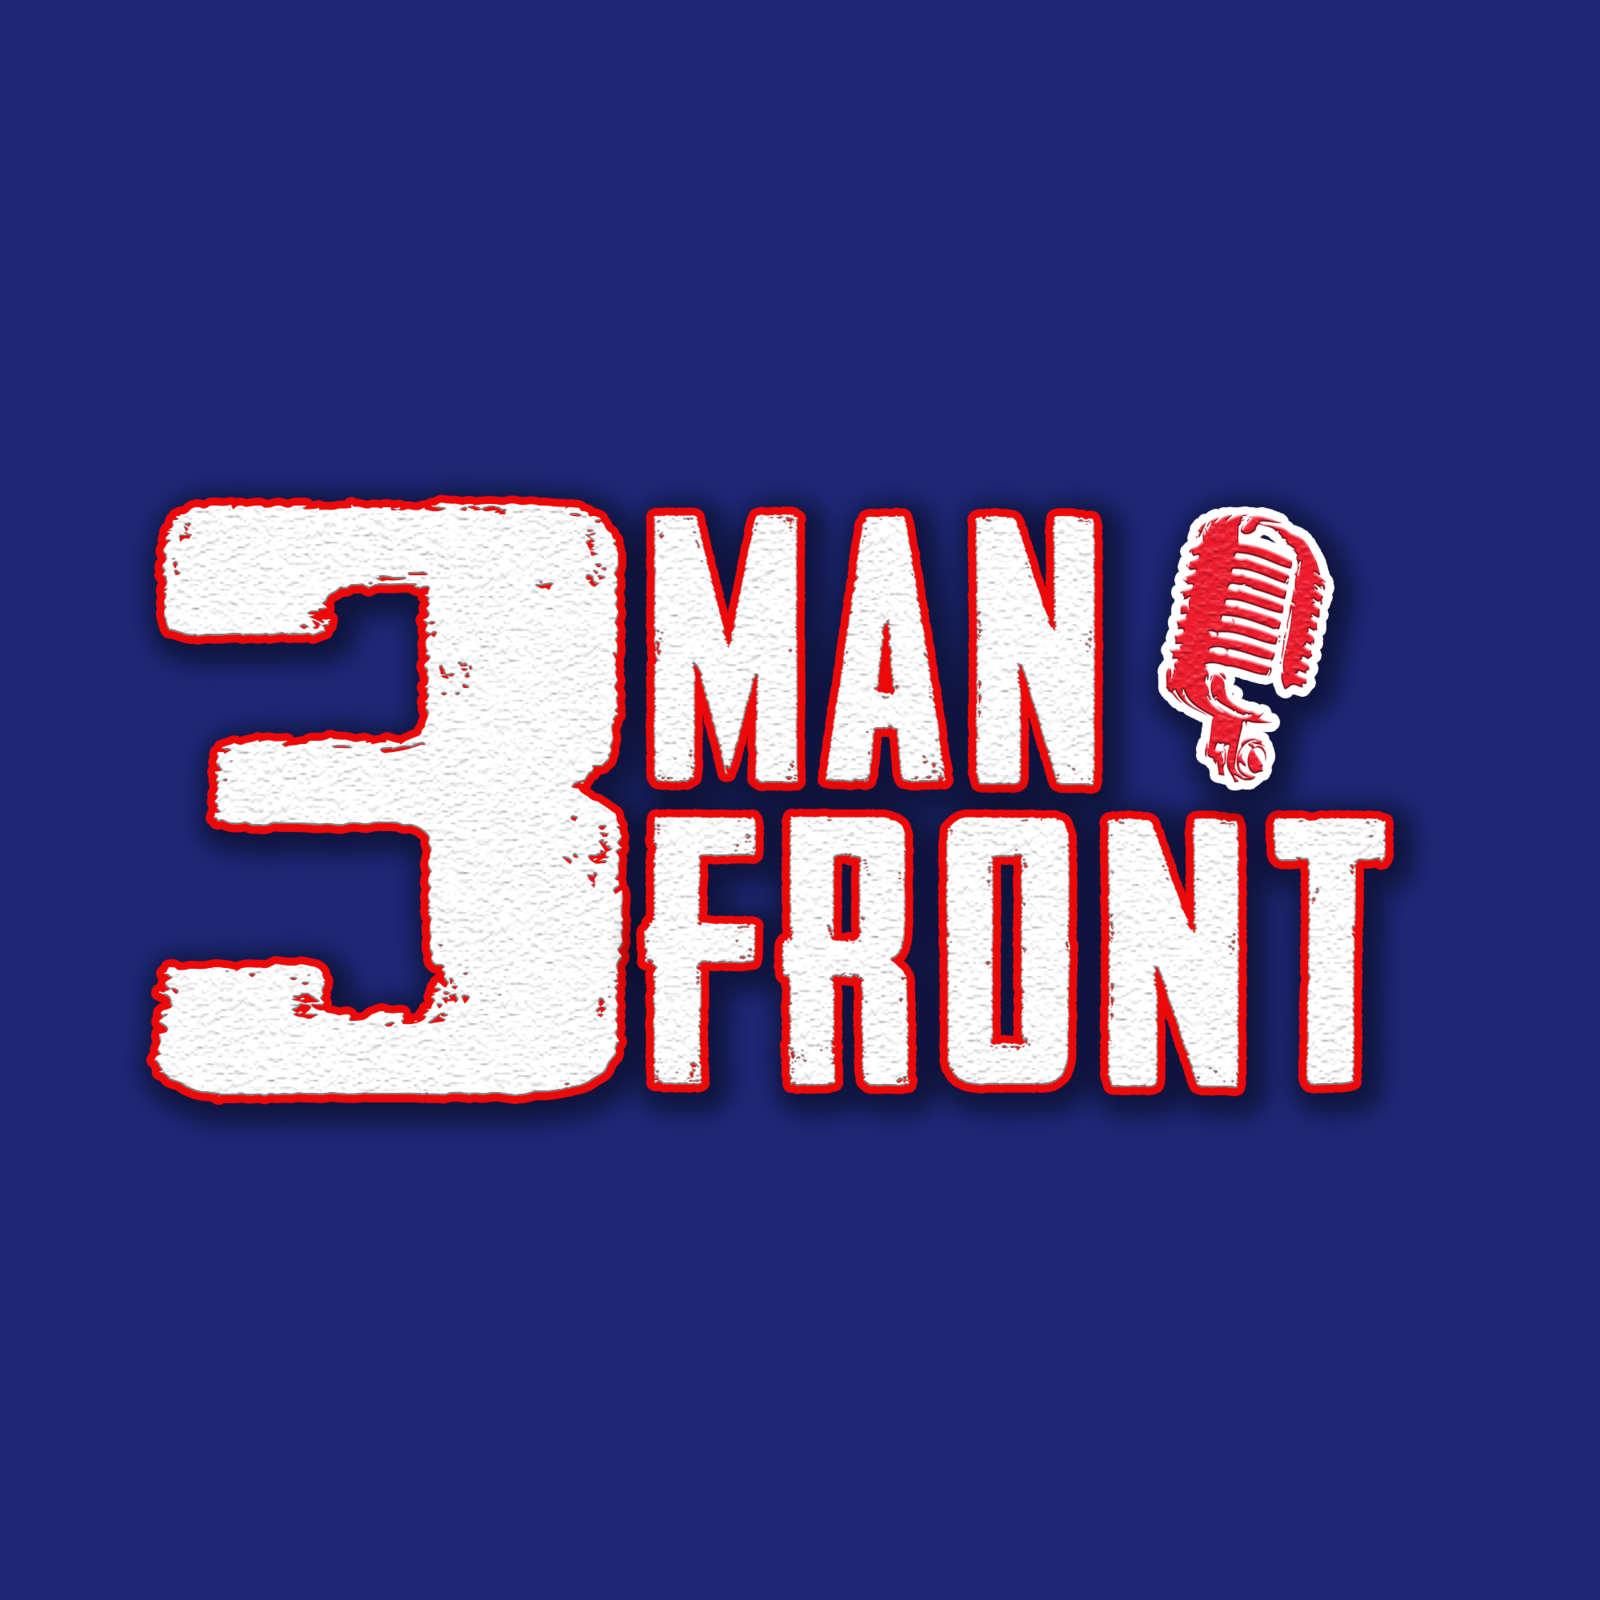 3 Man Front: Former Aubrun DB Rob Pate joins the show!